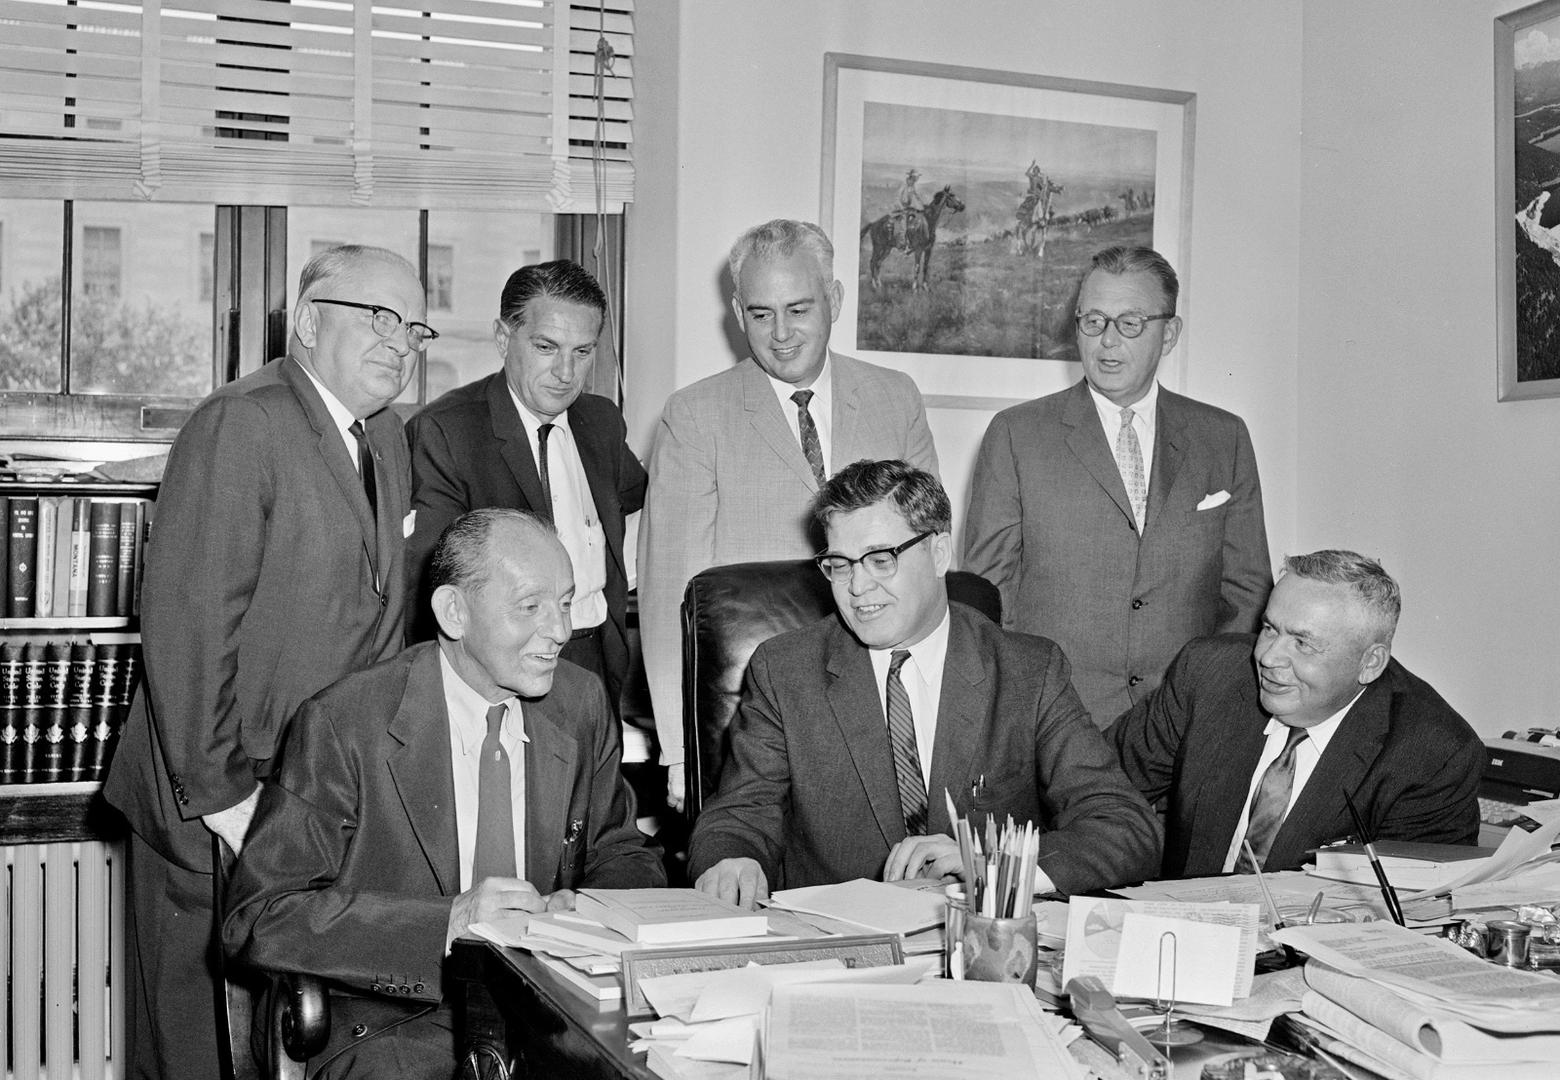 National conservation leaders meet with Metcalf in August 1961 to discuss legislative strategy regarding the proposed national wilderness preservation system bill.  Pictured, left to right, standing, Alden J. Erskin, president of the Izaak Walton League; Phil Schneider, president of the International Association of Game, Fish and Conservation Commissioners; Tom Kimball, executive director of the National Wildlife Federation; Carl W. Buchheister, president of the National Audubon Society; and left to right, seated, C.R. Gutermuth, chairman of the Natural Resources Council of America; Metcalf; and Ira N. Gabrielson, president of the Wildlife Management Institute.